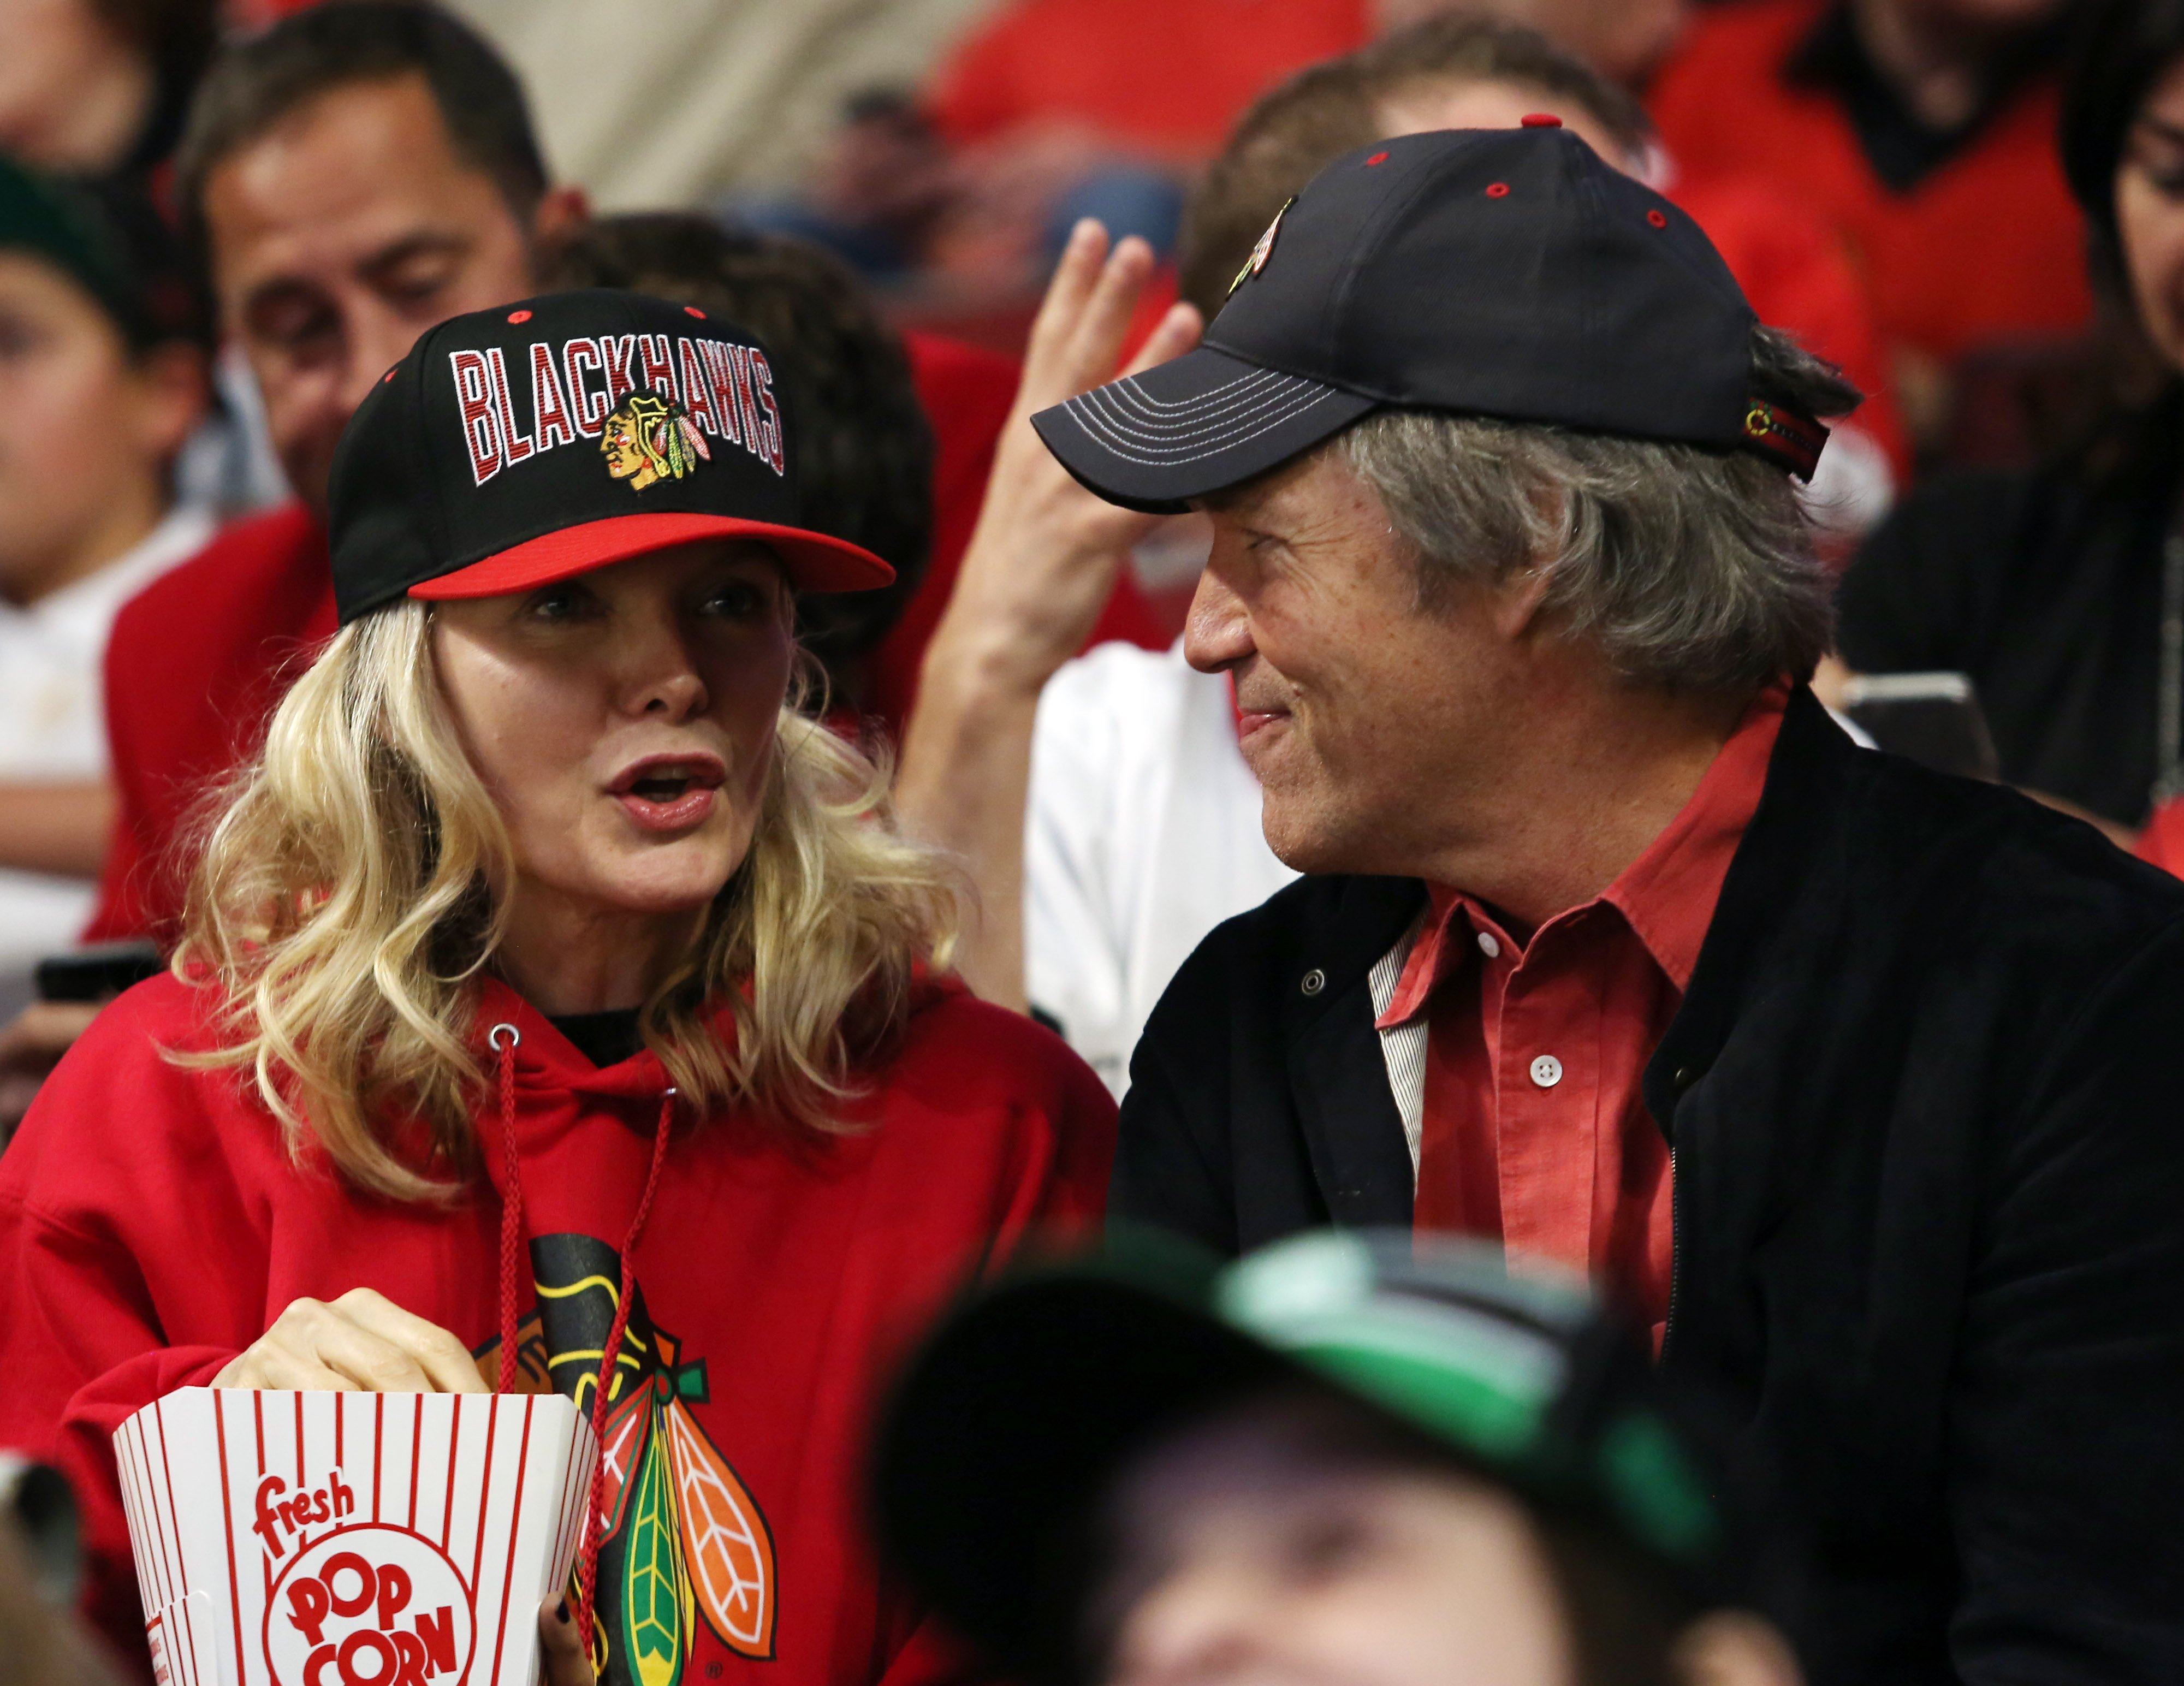 Michelle Pfeiffer and David E. Kelley at the United Center on June 22, 2013 in Chicago, Illinois. | Source: Getty Images